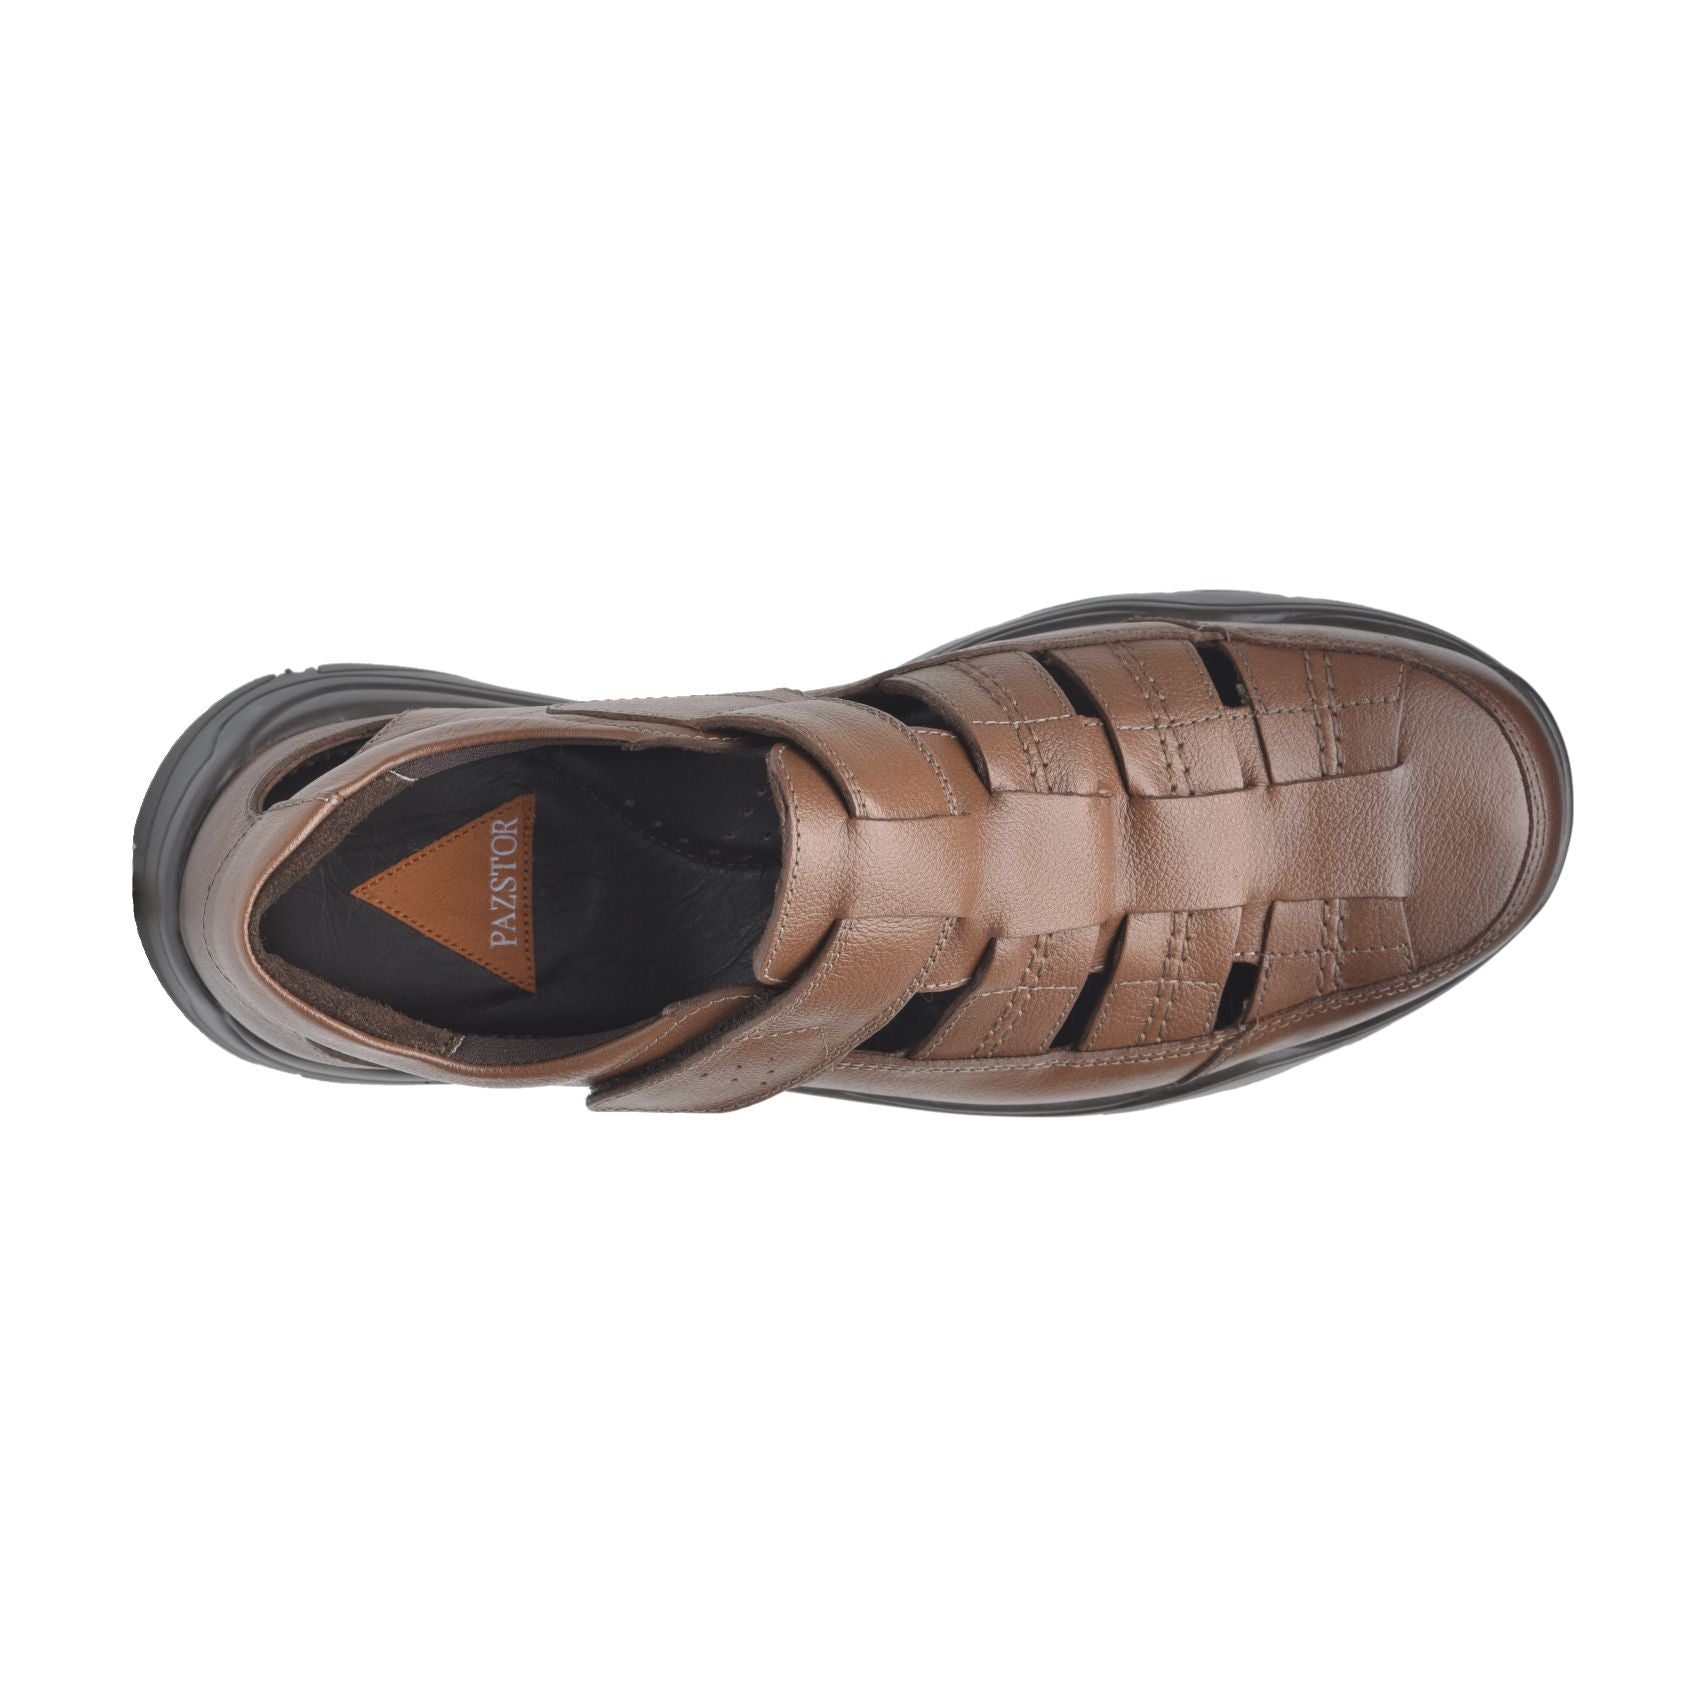 ultra comfort leather sandals for men luxury